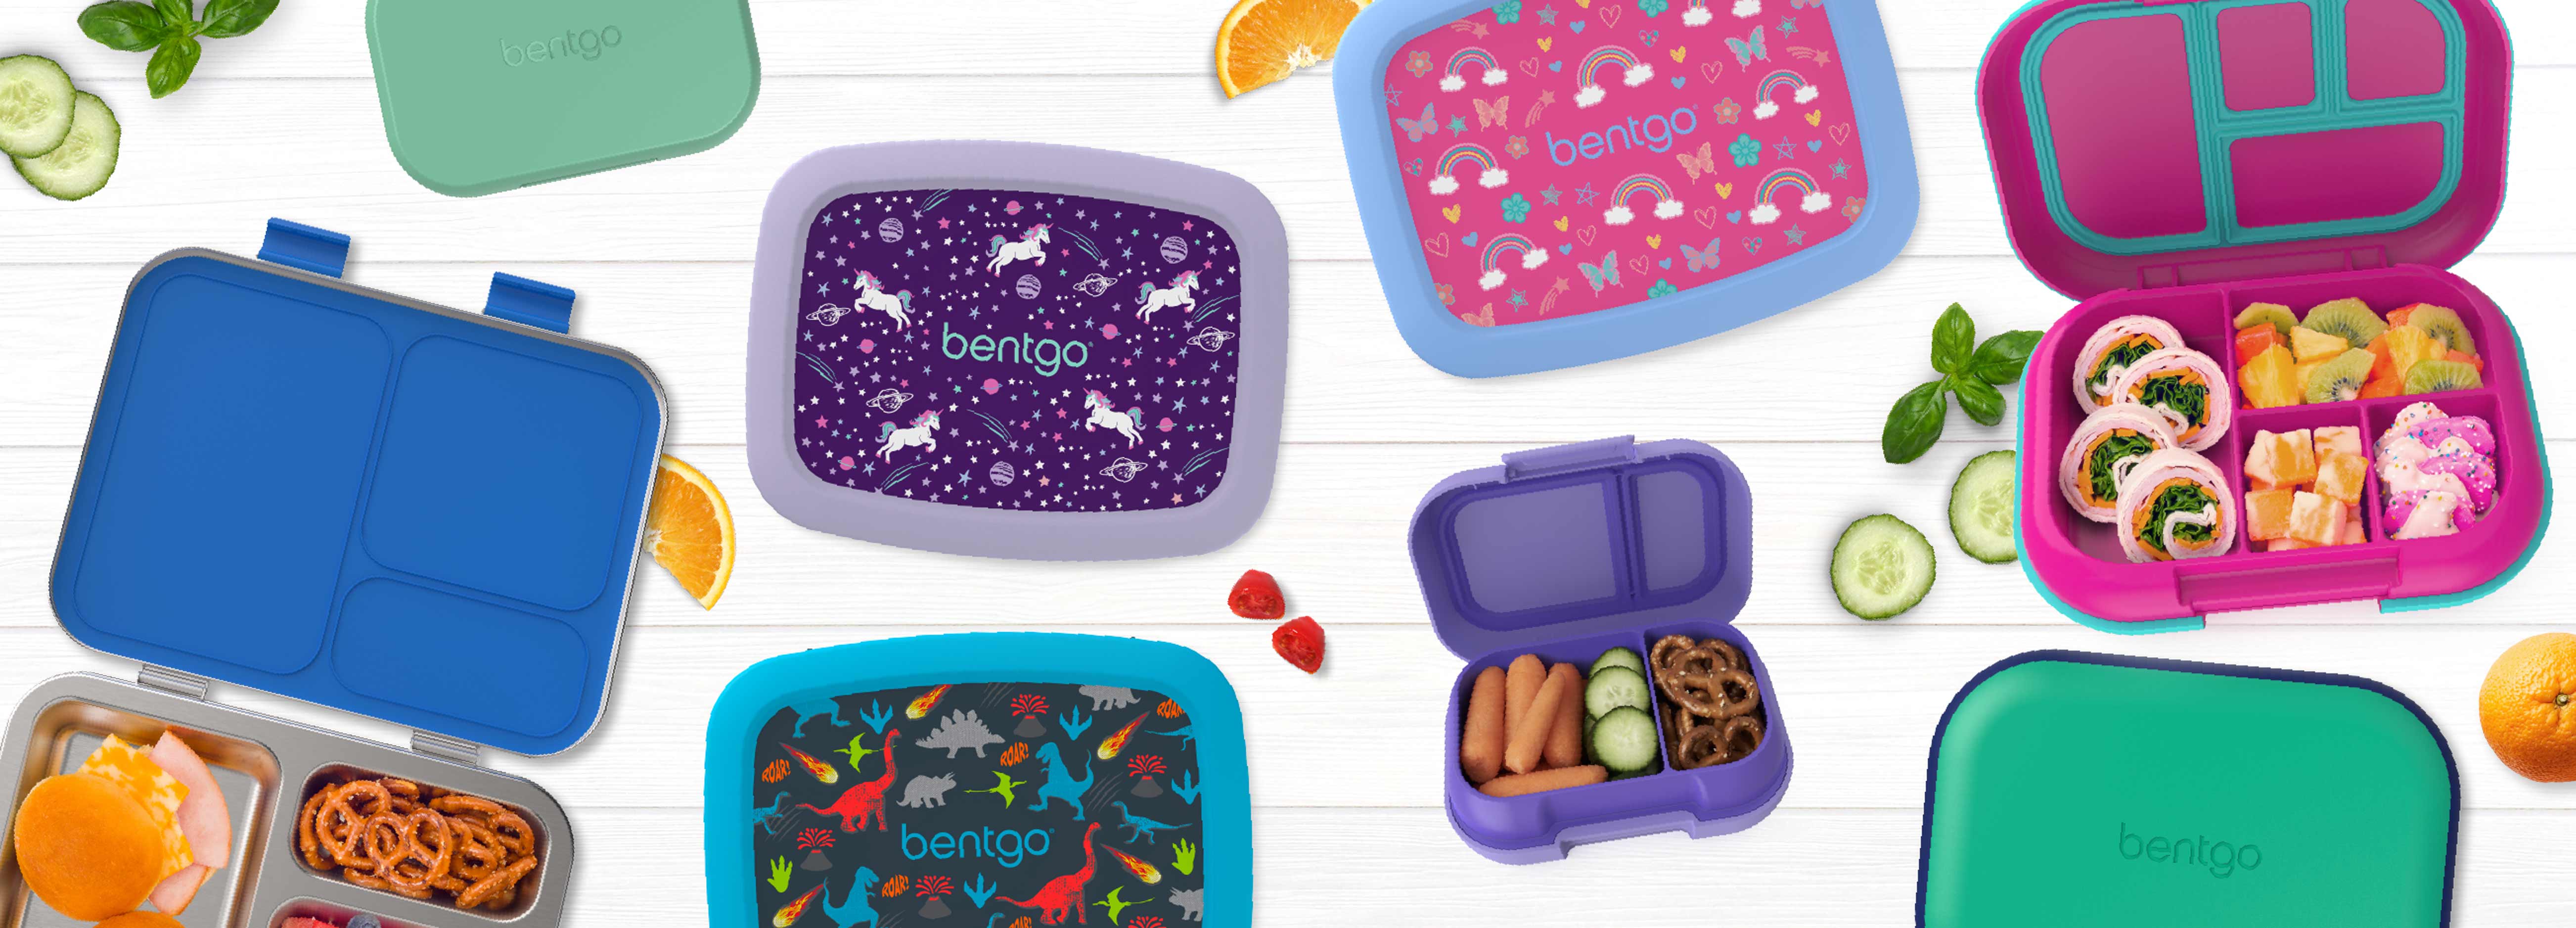  FOOYOO Plastic Bento Lunch Boxes for Kids - Big Kids